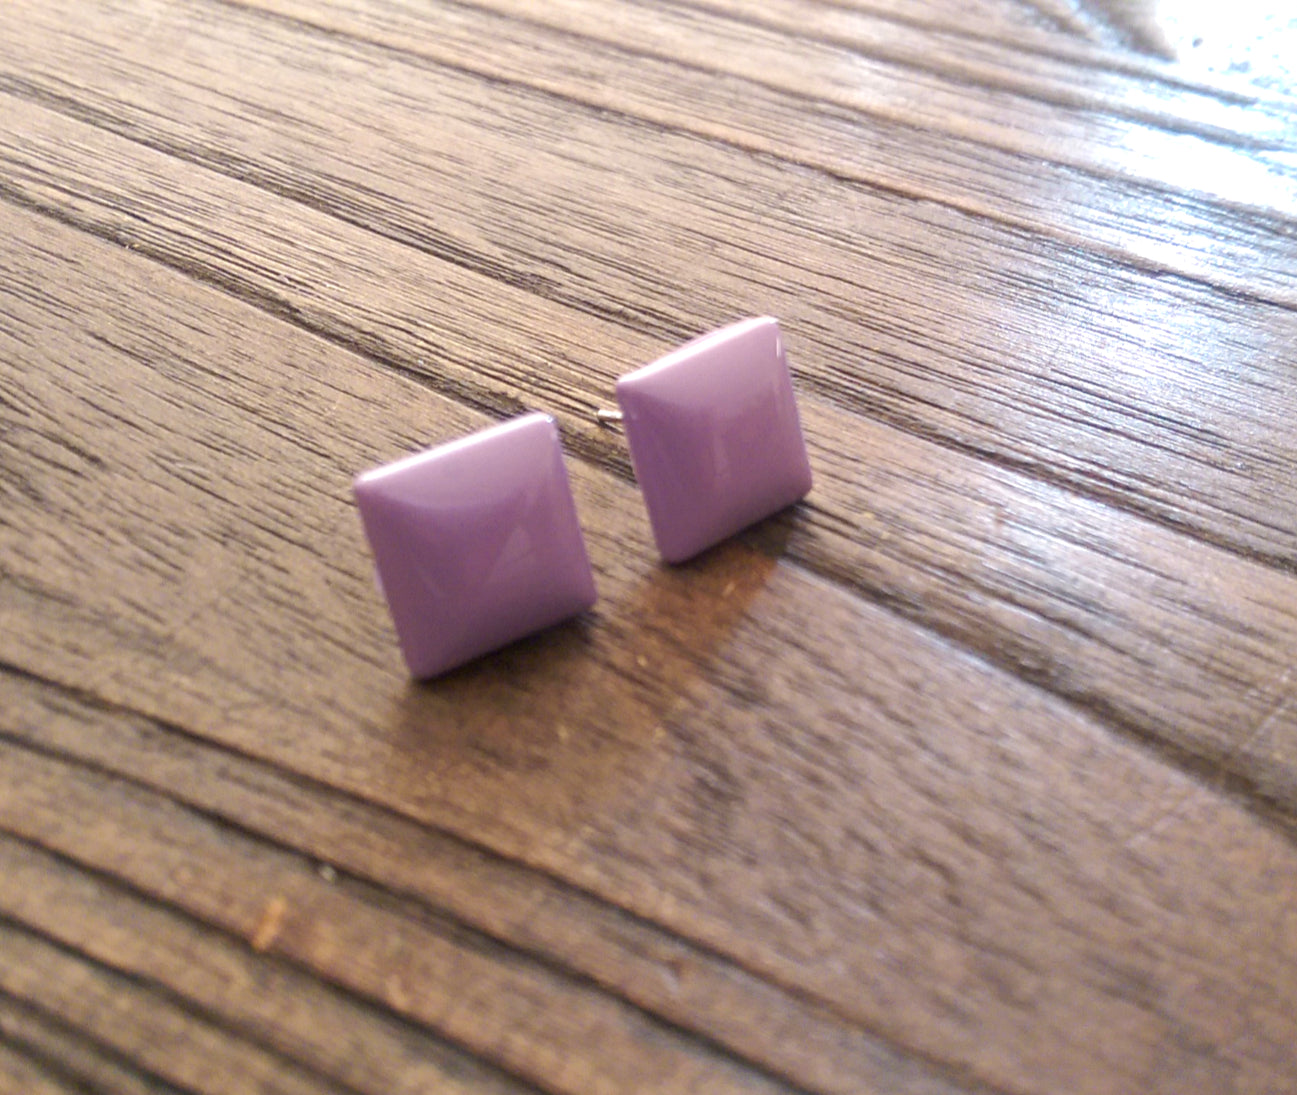 Lilac Square Resin Stud Earrings, Stainless Steel Stud Earrings. 12mm - Silver and Resin Designs